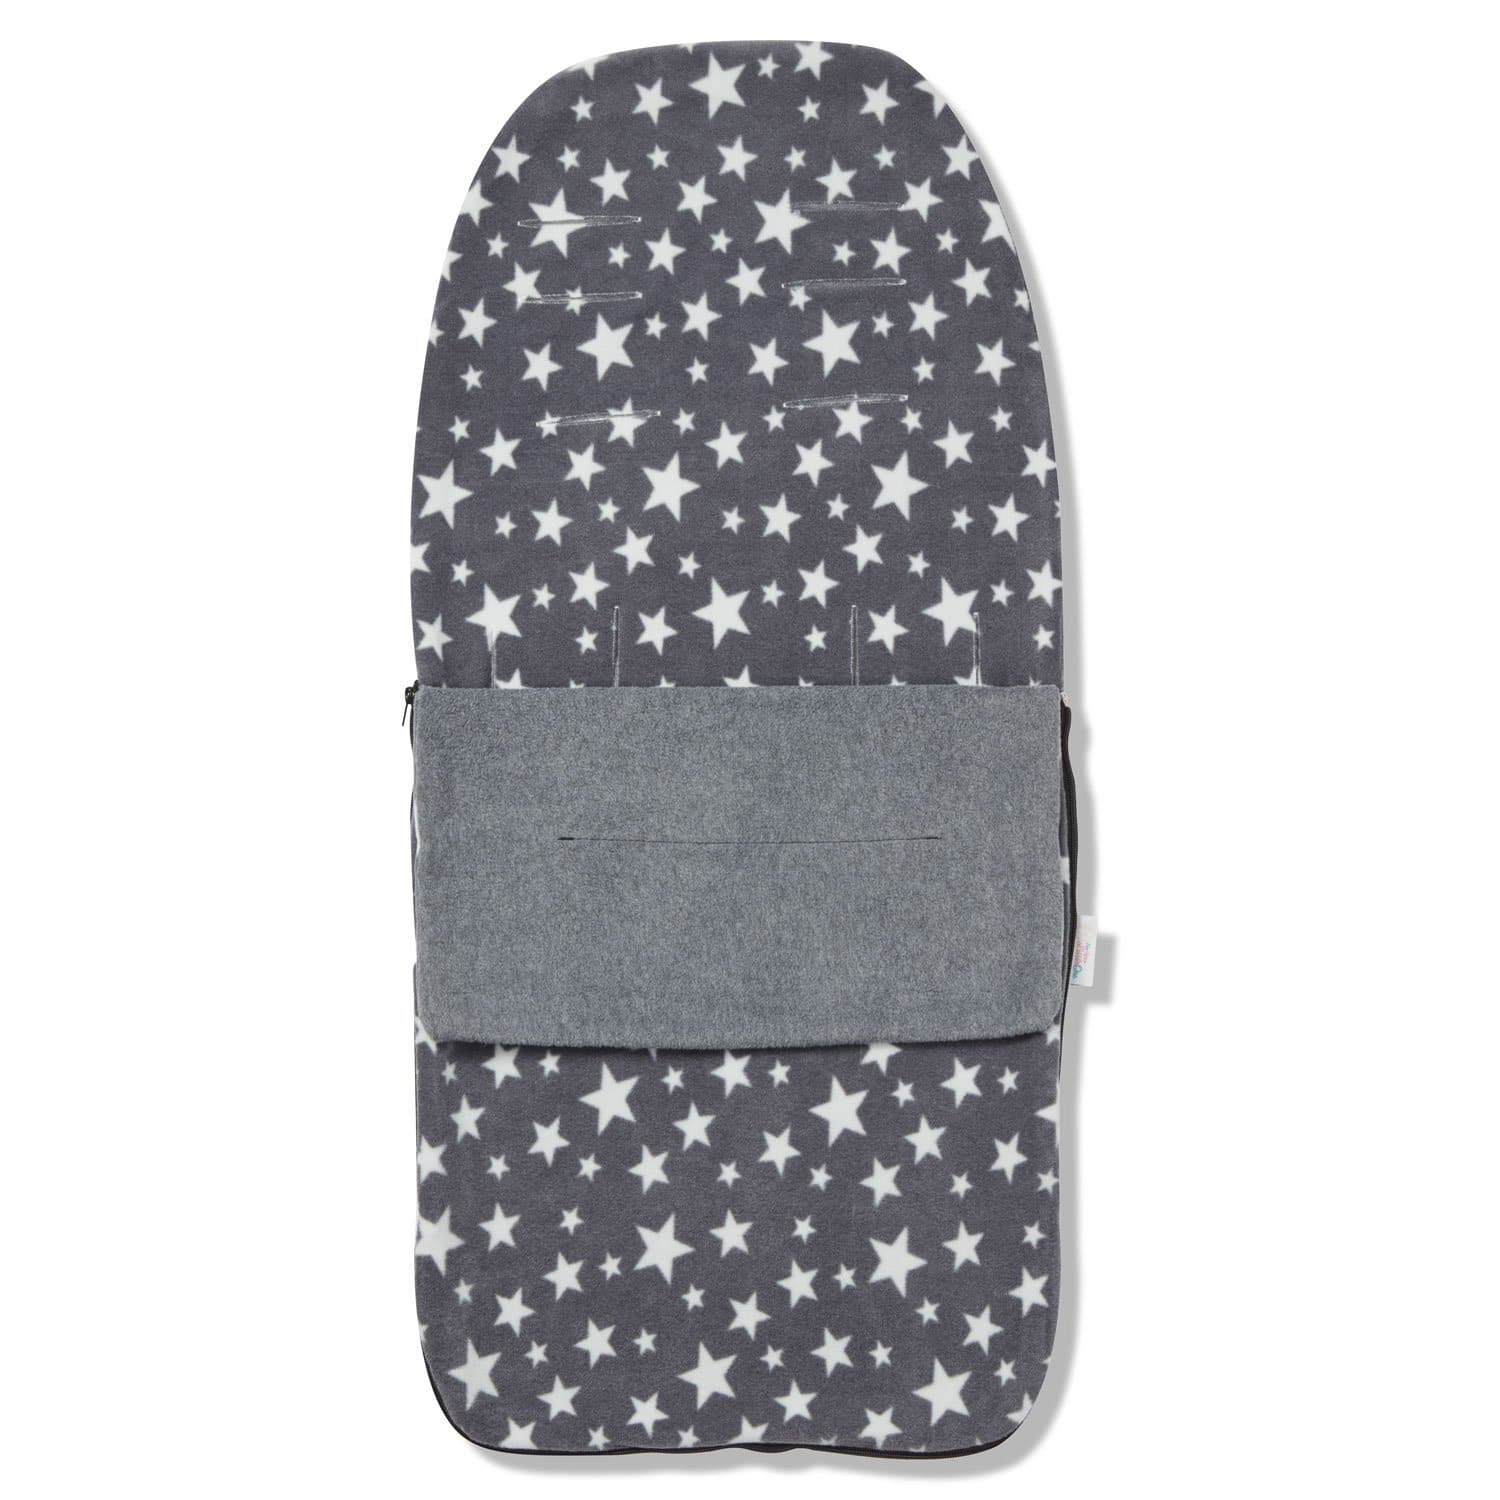 Universal Snuggle Buggy Summer Footmuff - Fits All Pushchairs / Prams And Buggies - For Your Little One